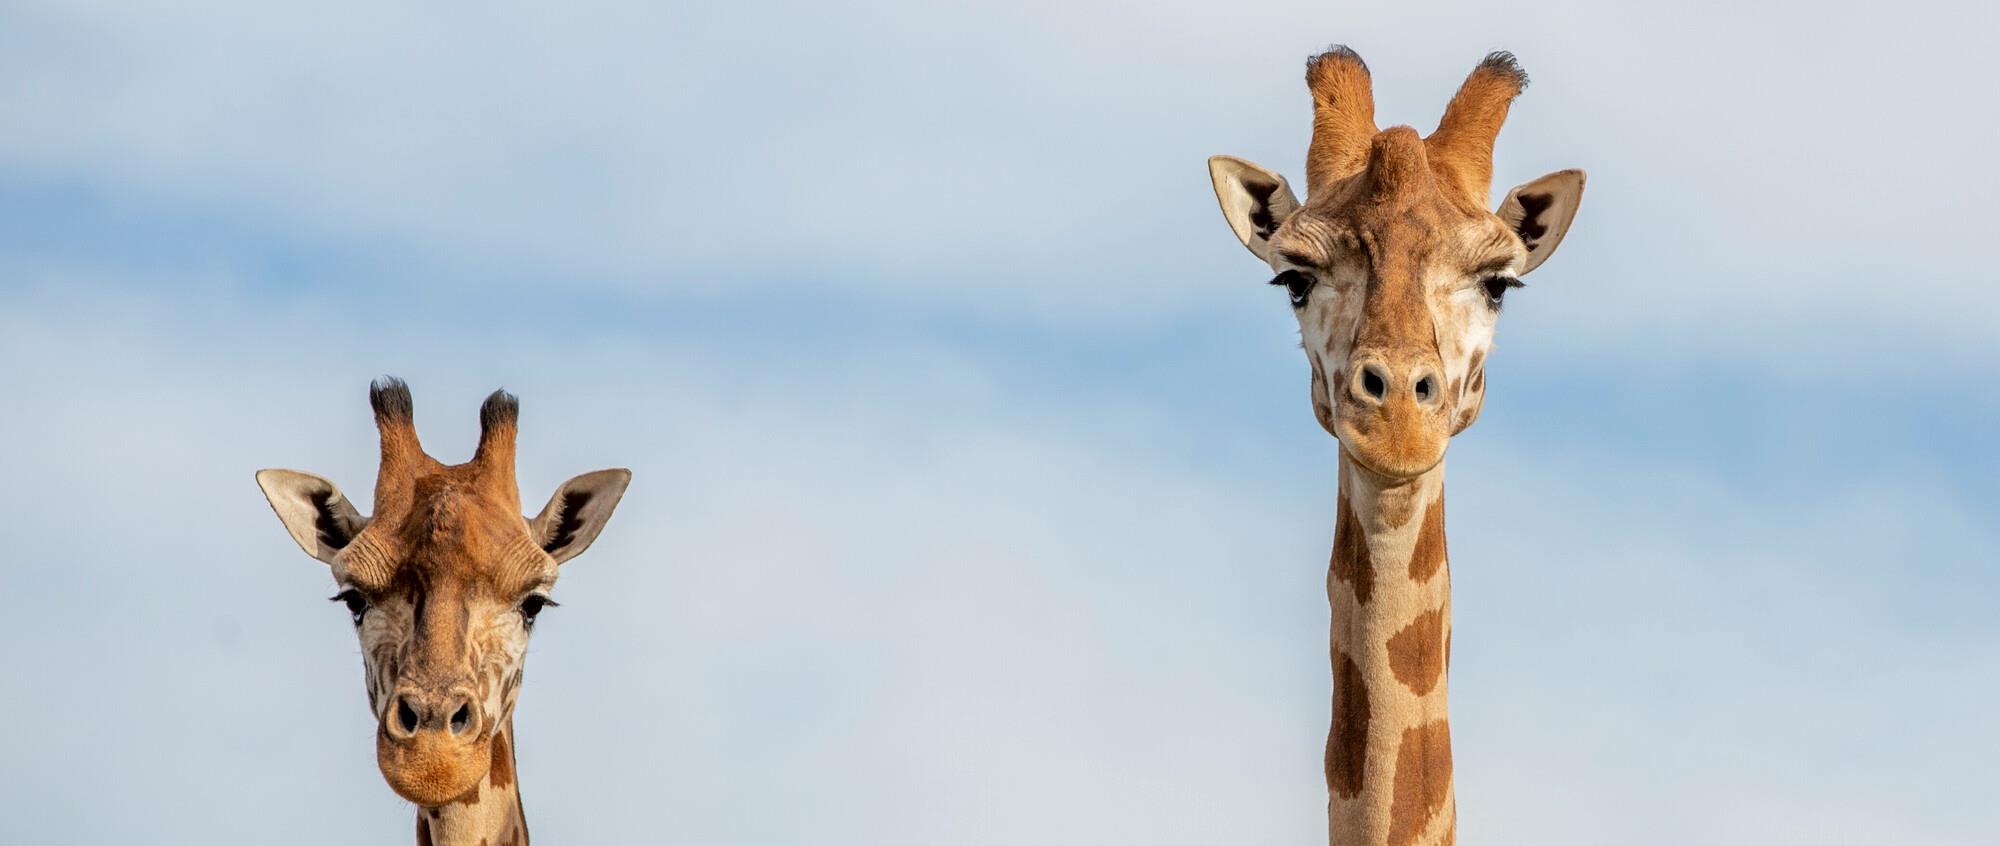 Two giraffe heads with clouds and blue sky in background. both looking at camera. 